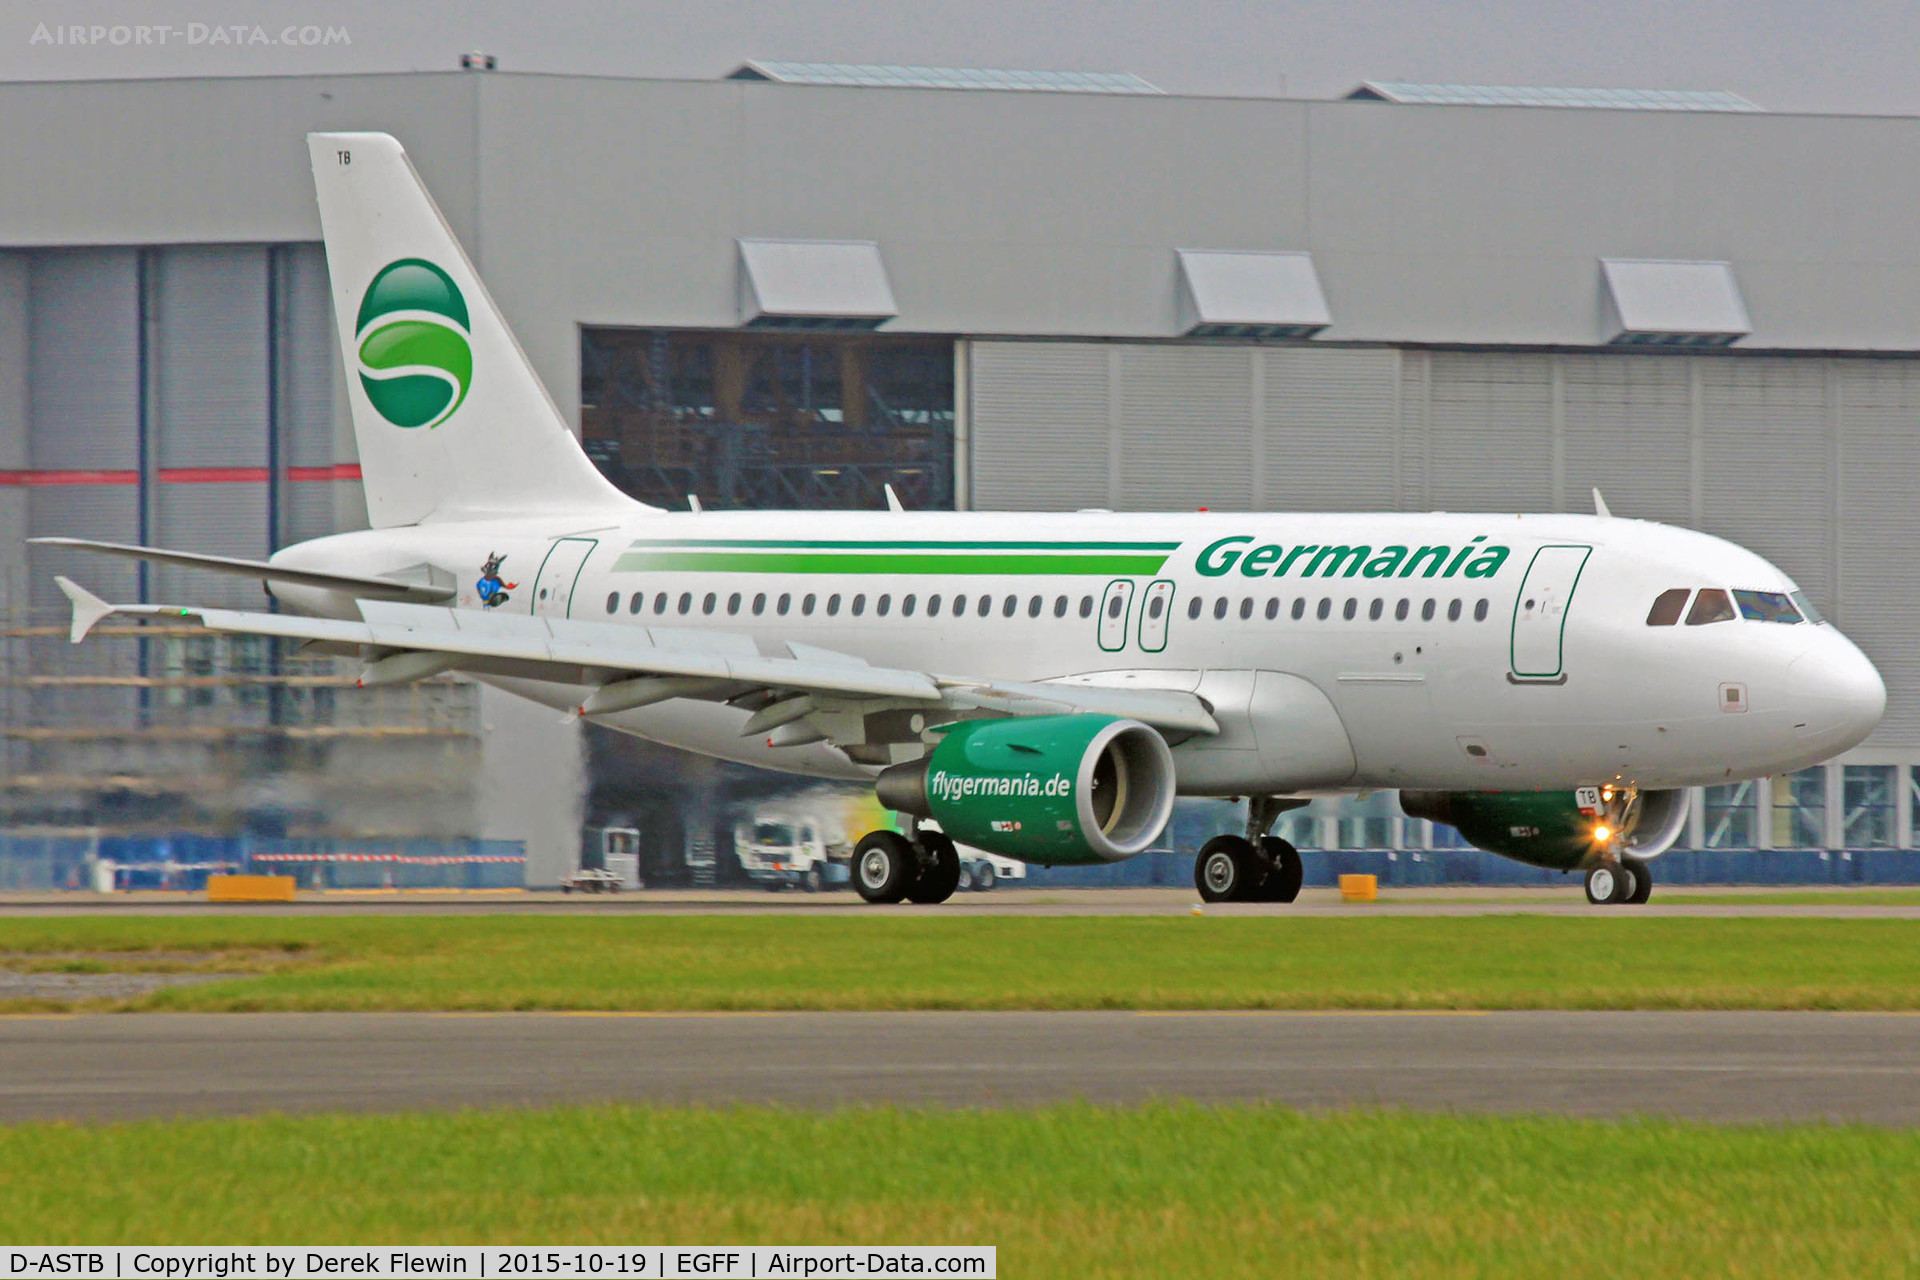 D-ASTB, 2011 Airbus A319-112 C/N 4691, A319-112, call sign Germania 4848, seen landing on runway 12 out of Gatwick.